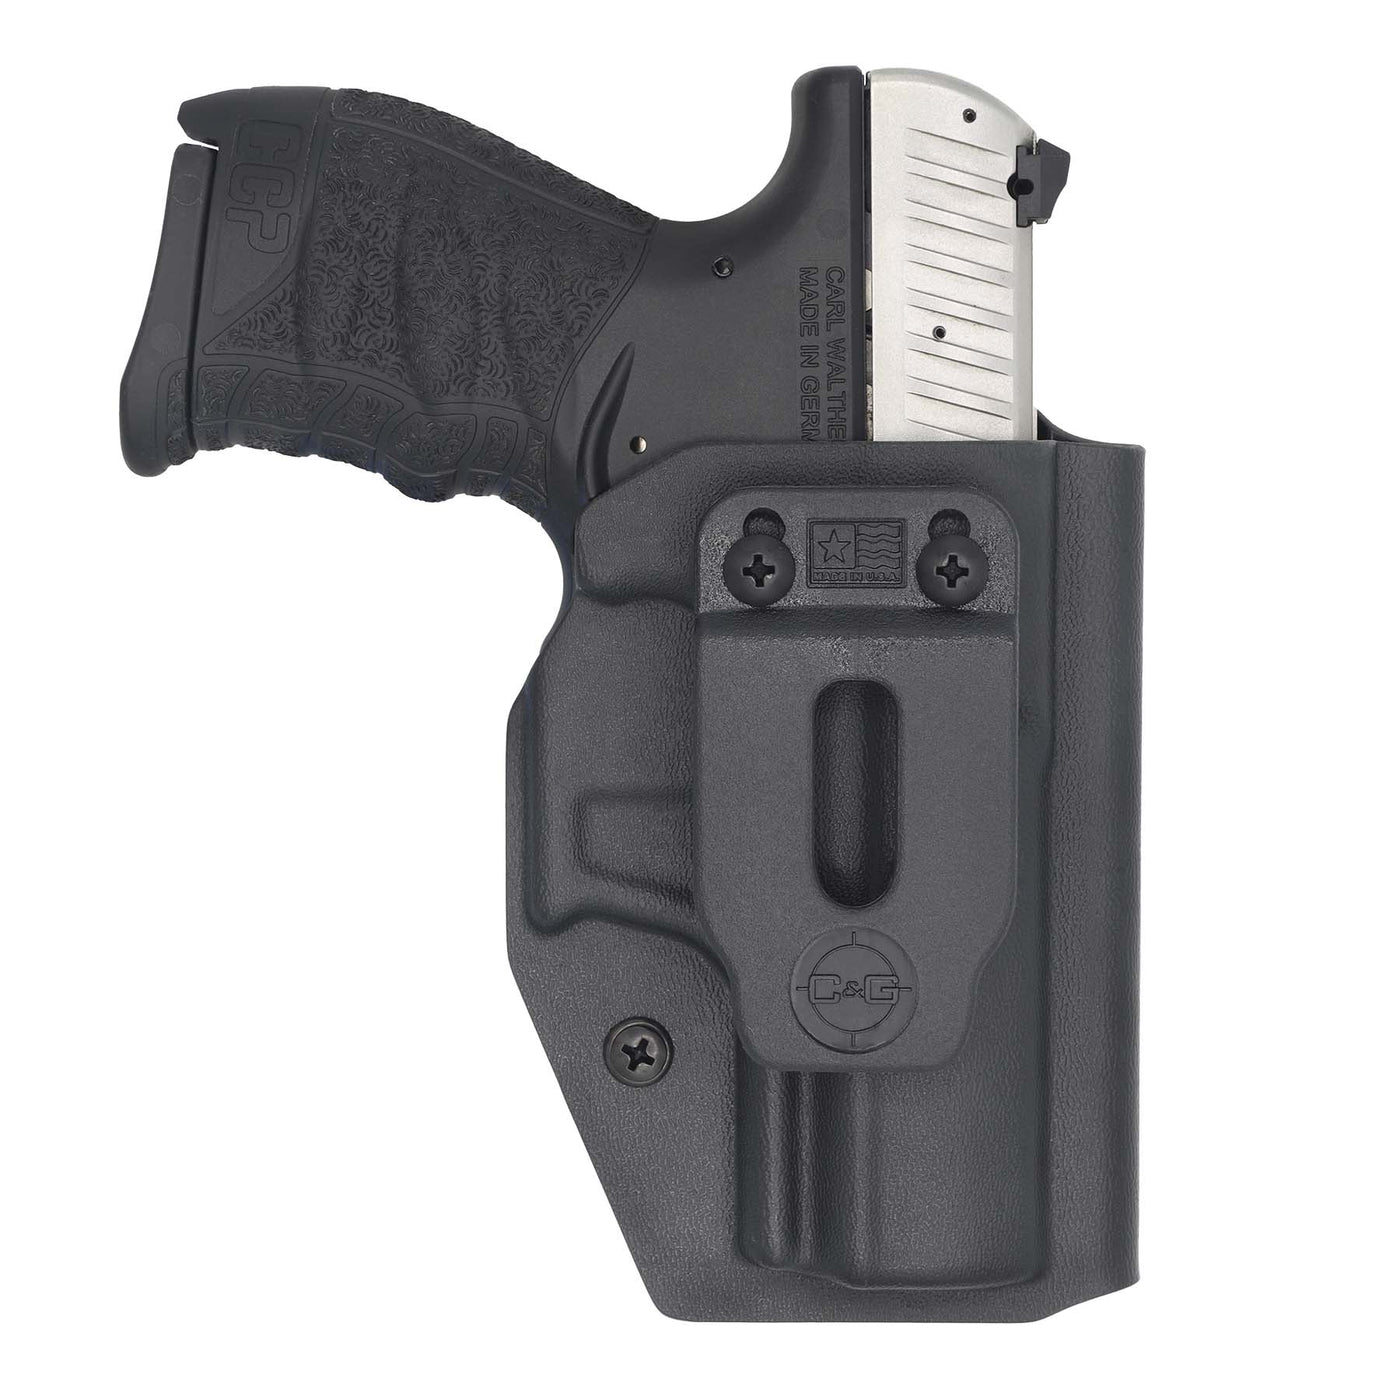 C&G Holsters IWB inside the waistband Holster for the Walther CCP holstered position